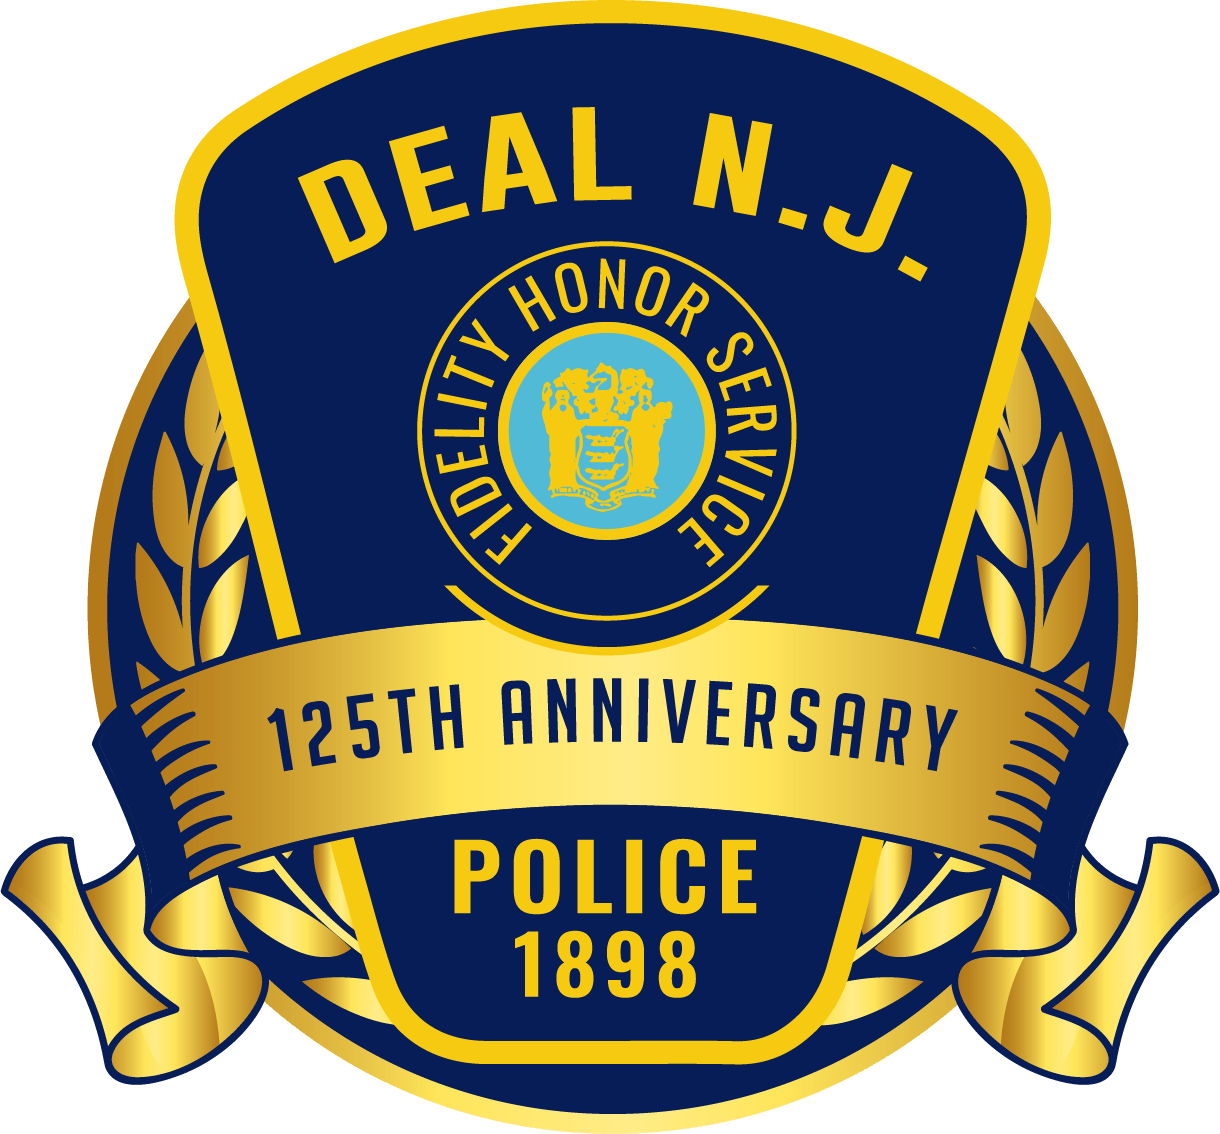 Deal Police Department-125-1